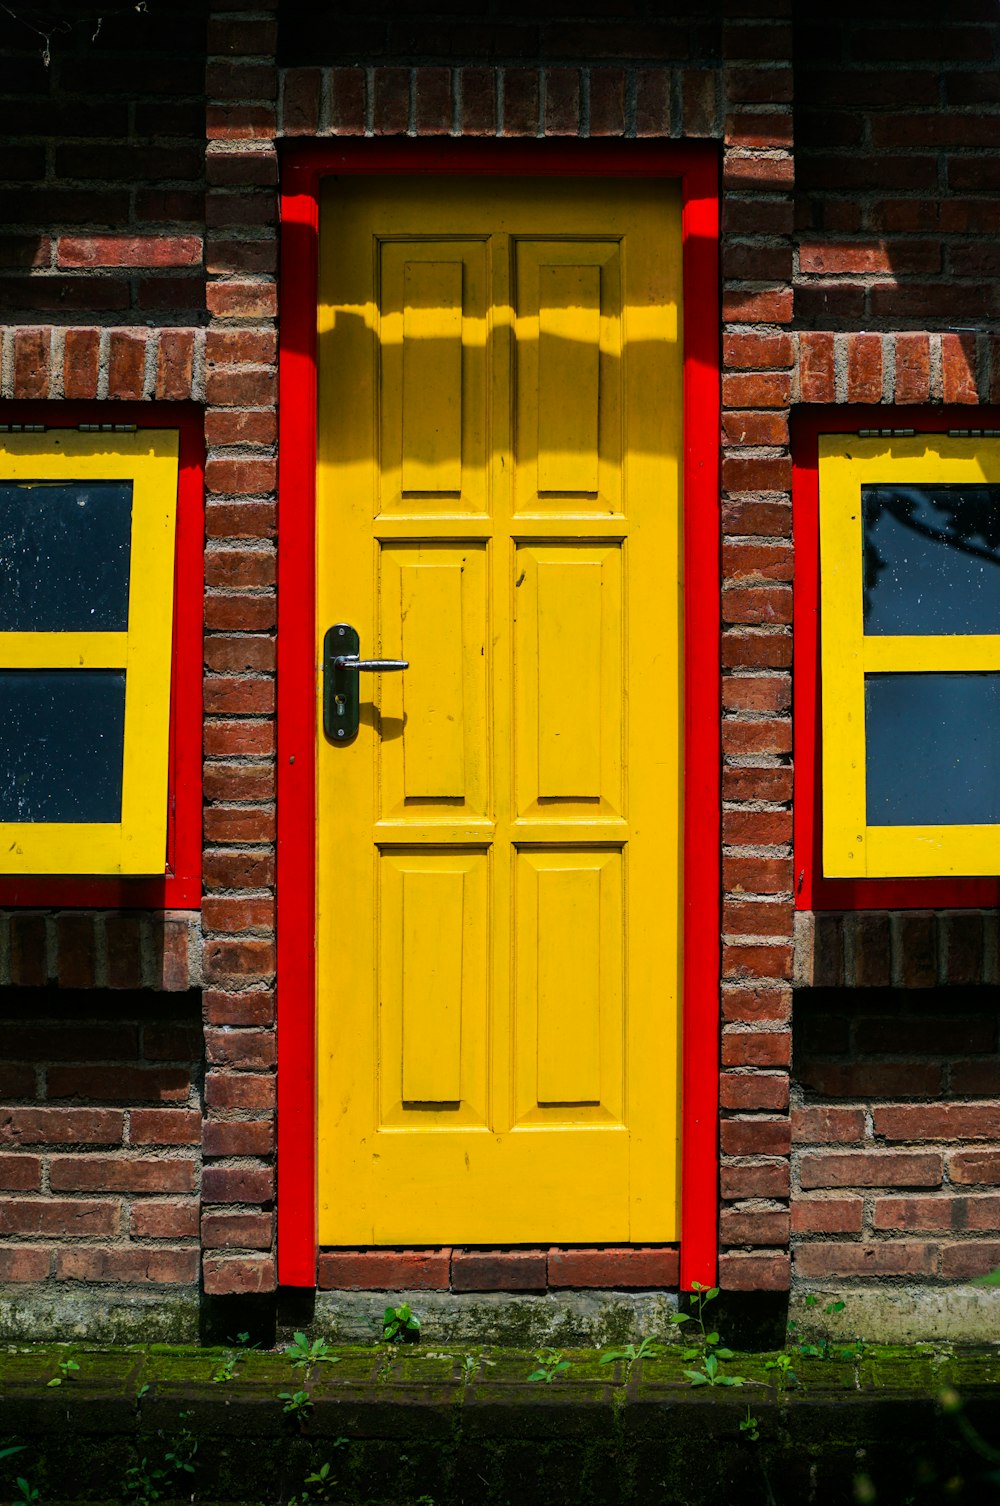 a red and yellow door and windows on a brick building